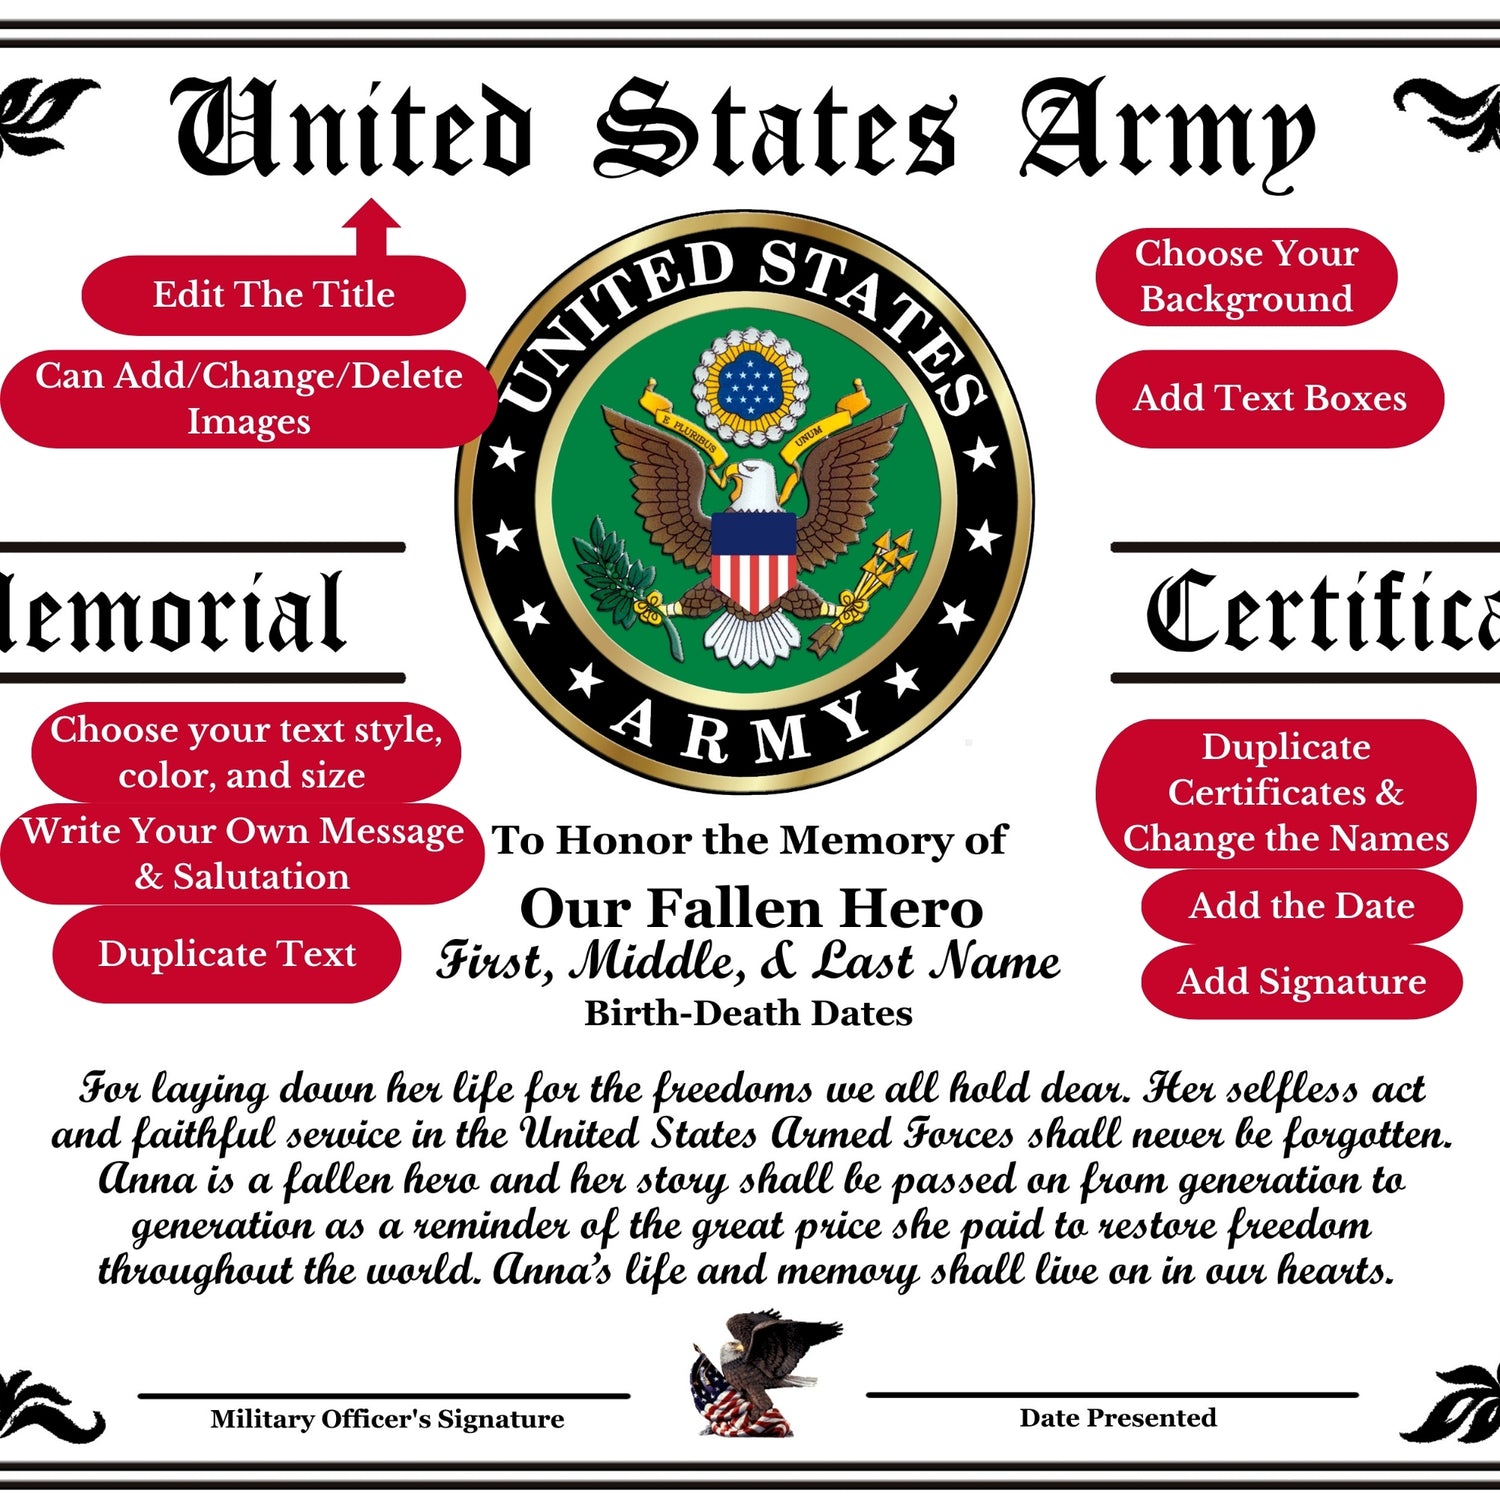 Customize your military memorial certificate